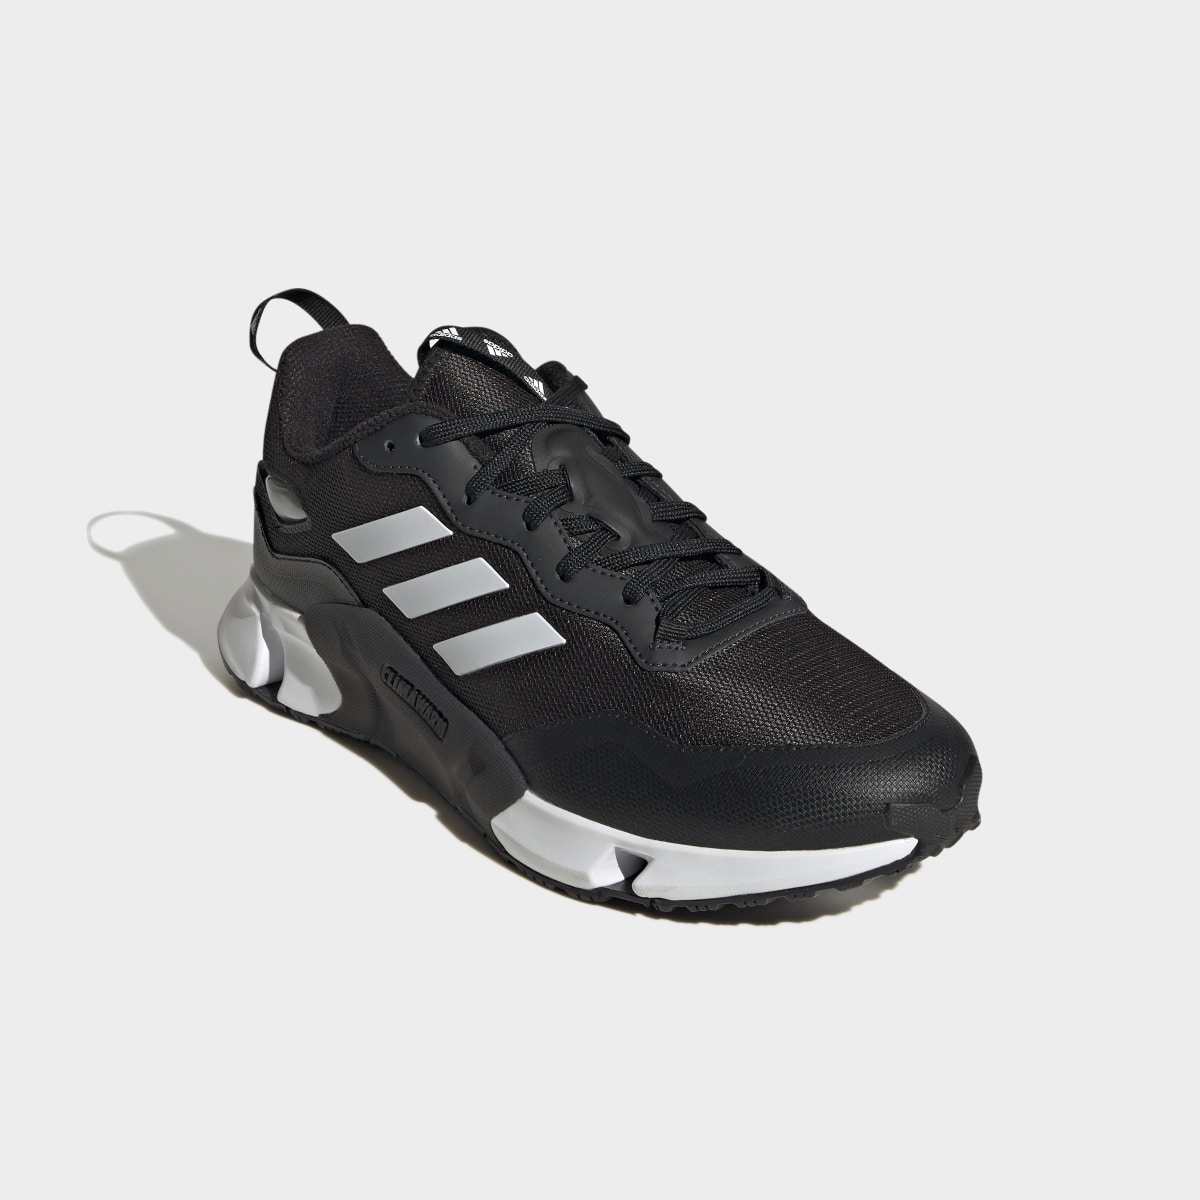 Adidas Chaussure Climawarm. 8